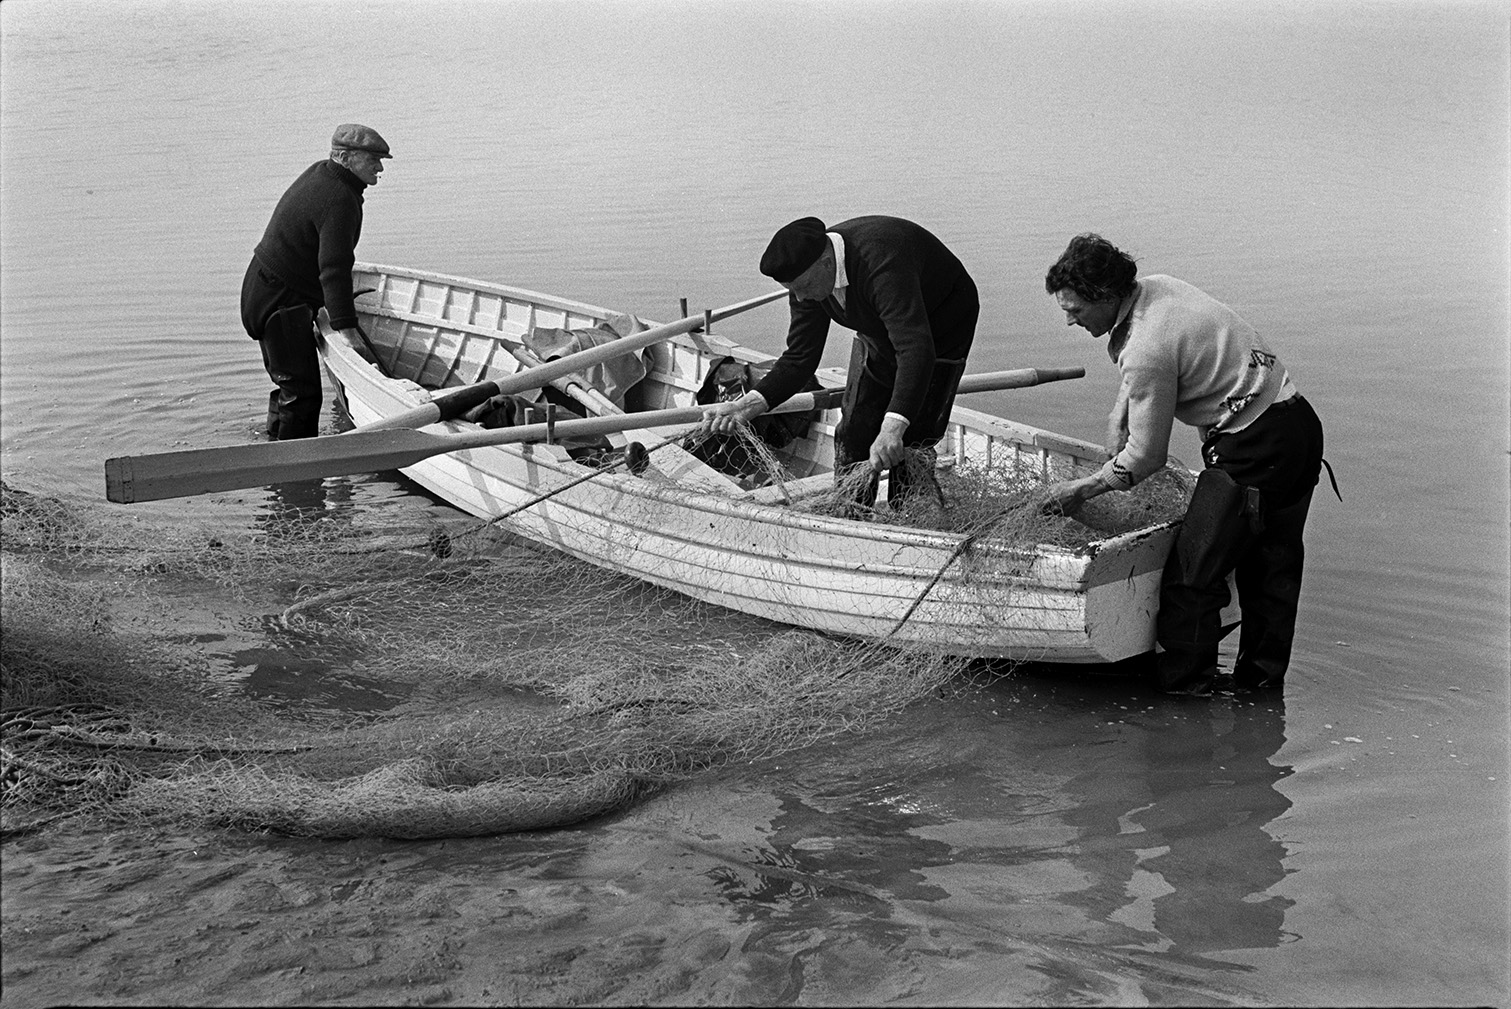 Two men hauling a fishing net into rowing boat, possibly at Appledore. Two oars are resting across the boat and another man is stood in the water and leaning on the rowing boat.